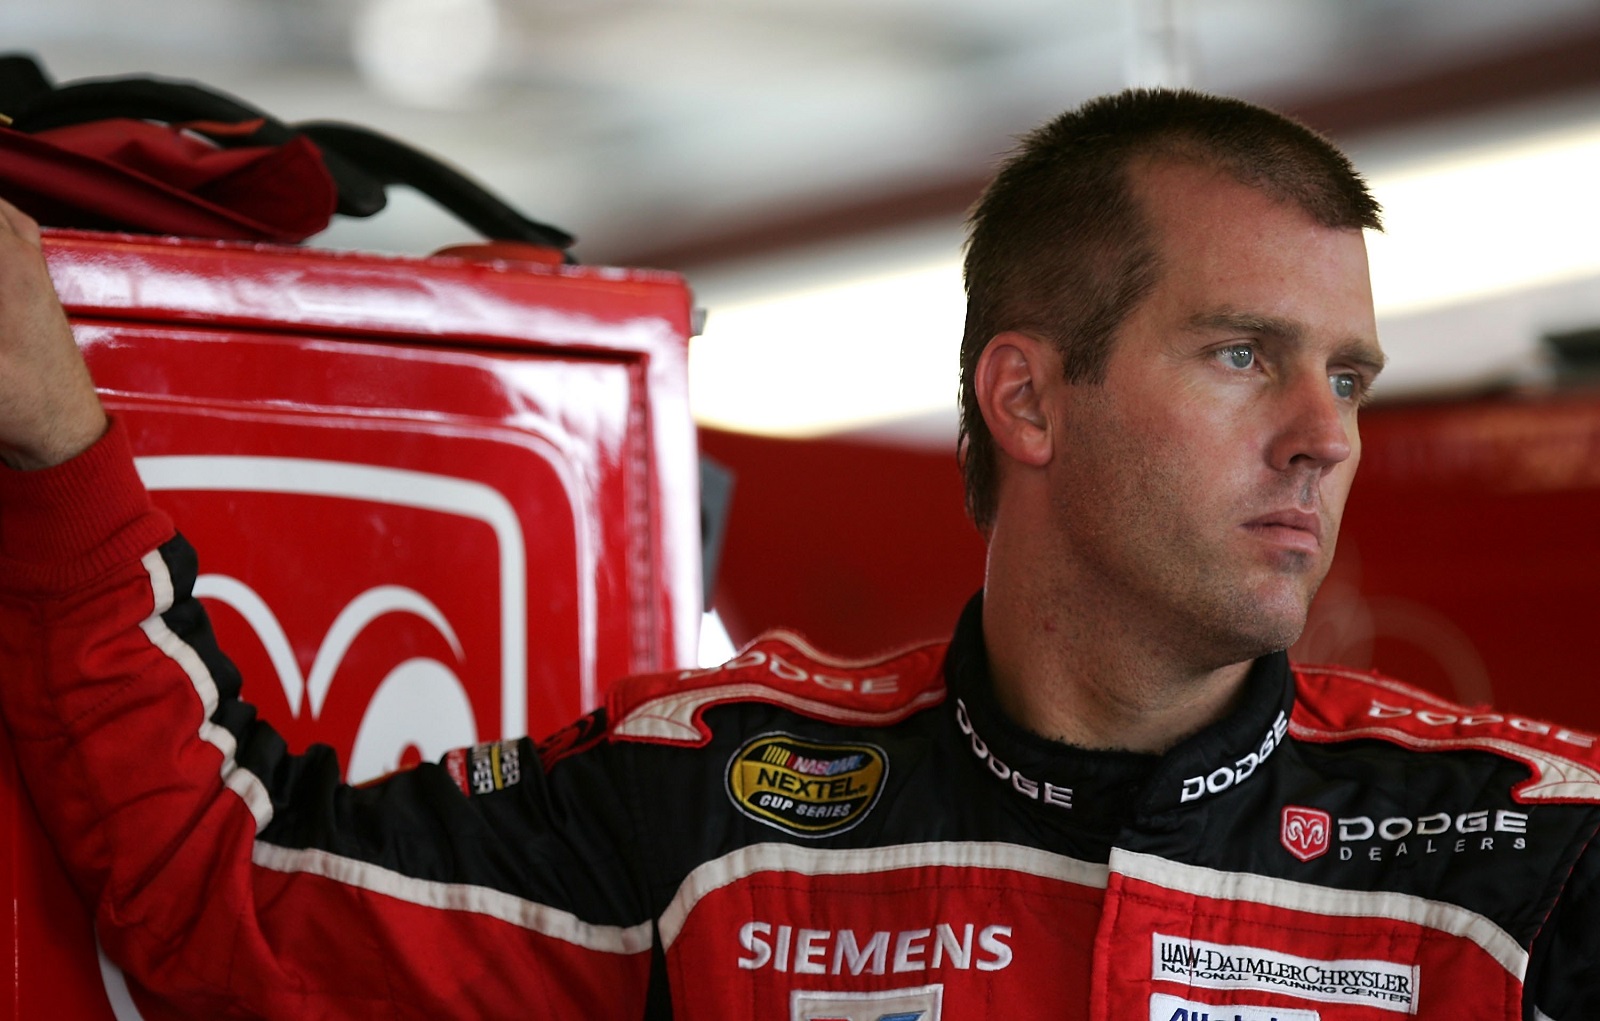 Jeremy Mayfield’s NASCAR Career Changed Forever After He Tested Positive for Meth and Accused His Stepmom of Murder